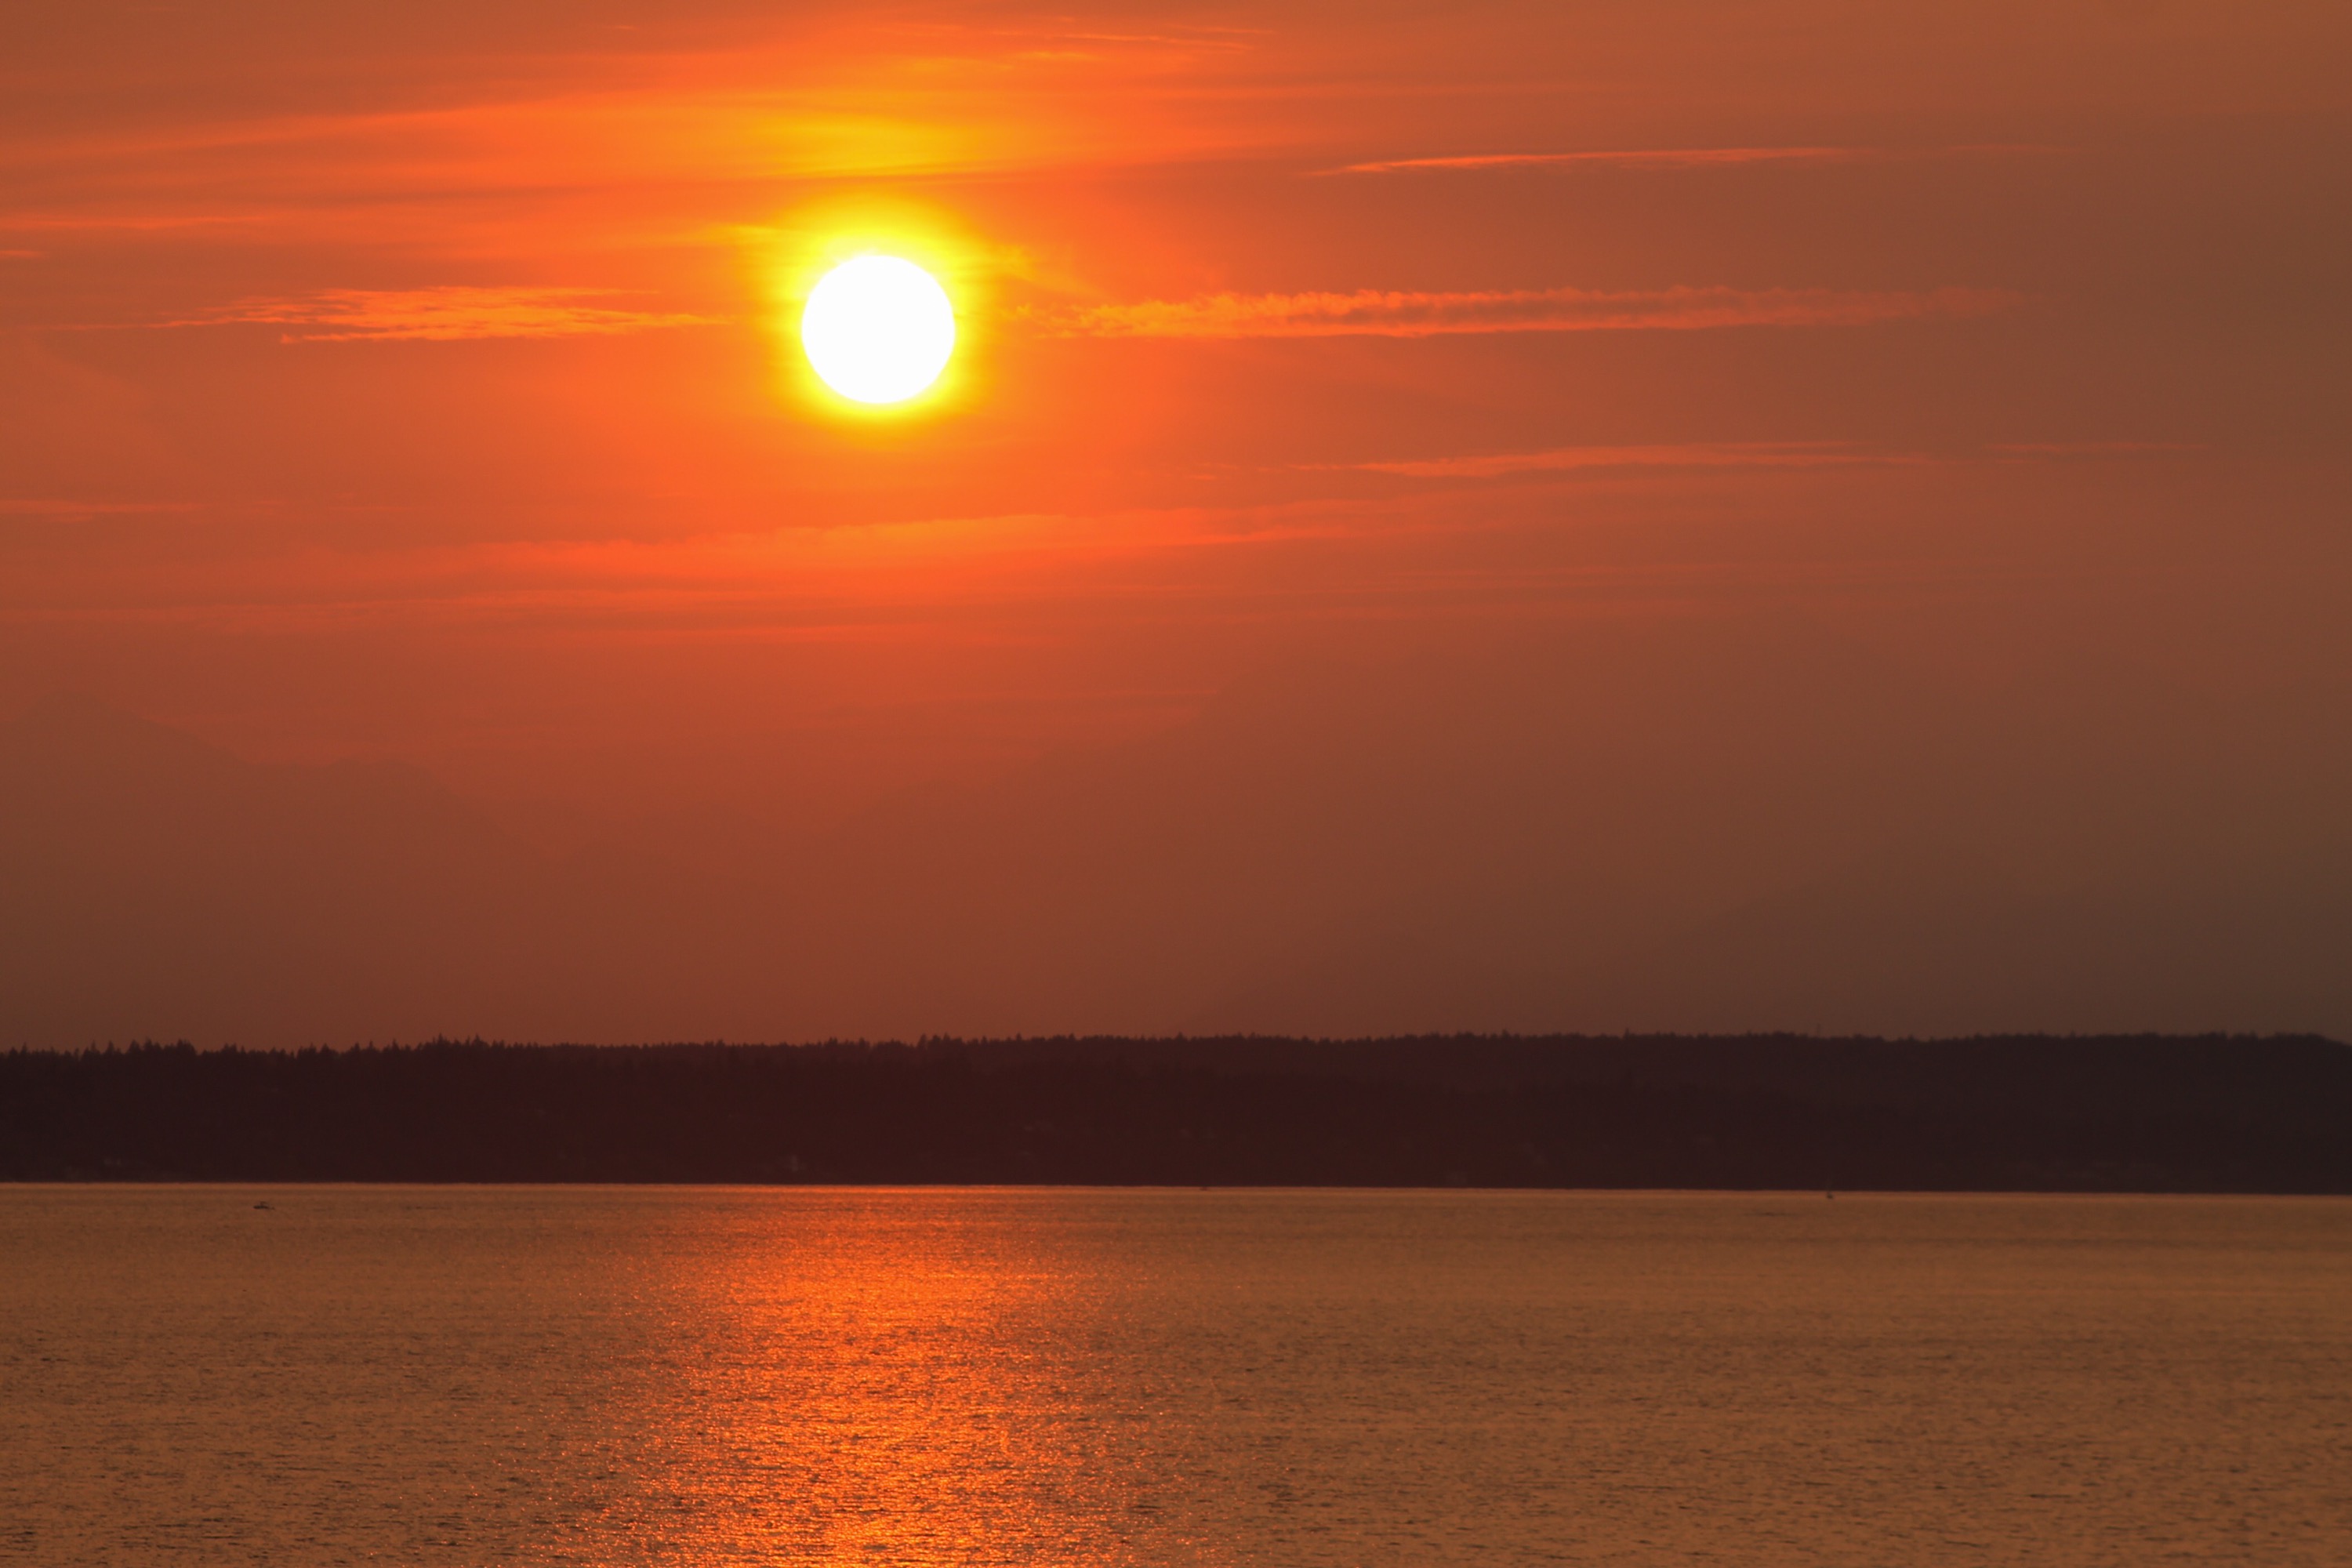 Pictures of Today 8/23/15, Setting Sun over the Hazy Sky ...